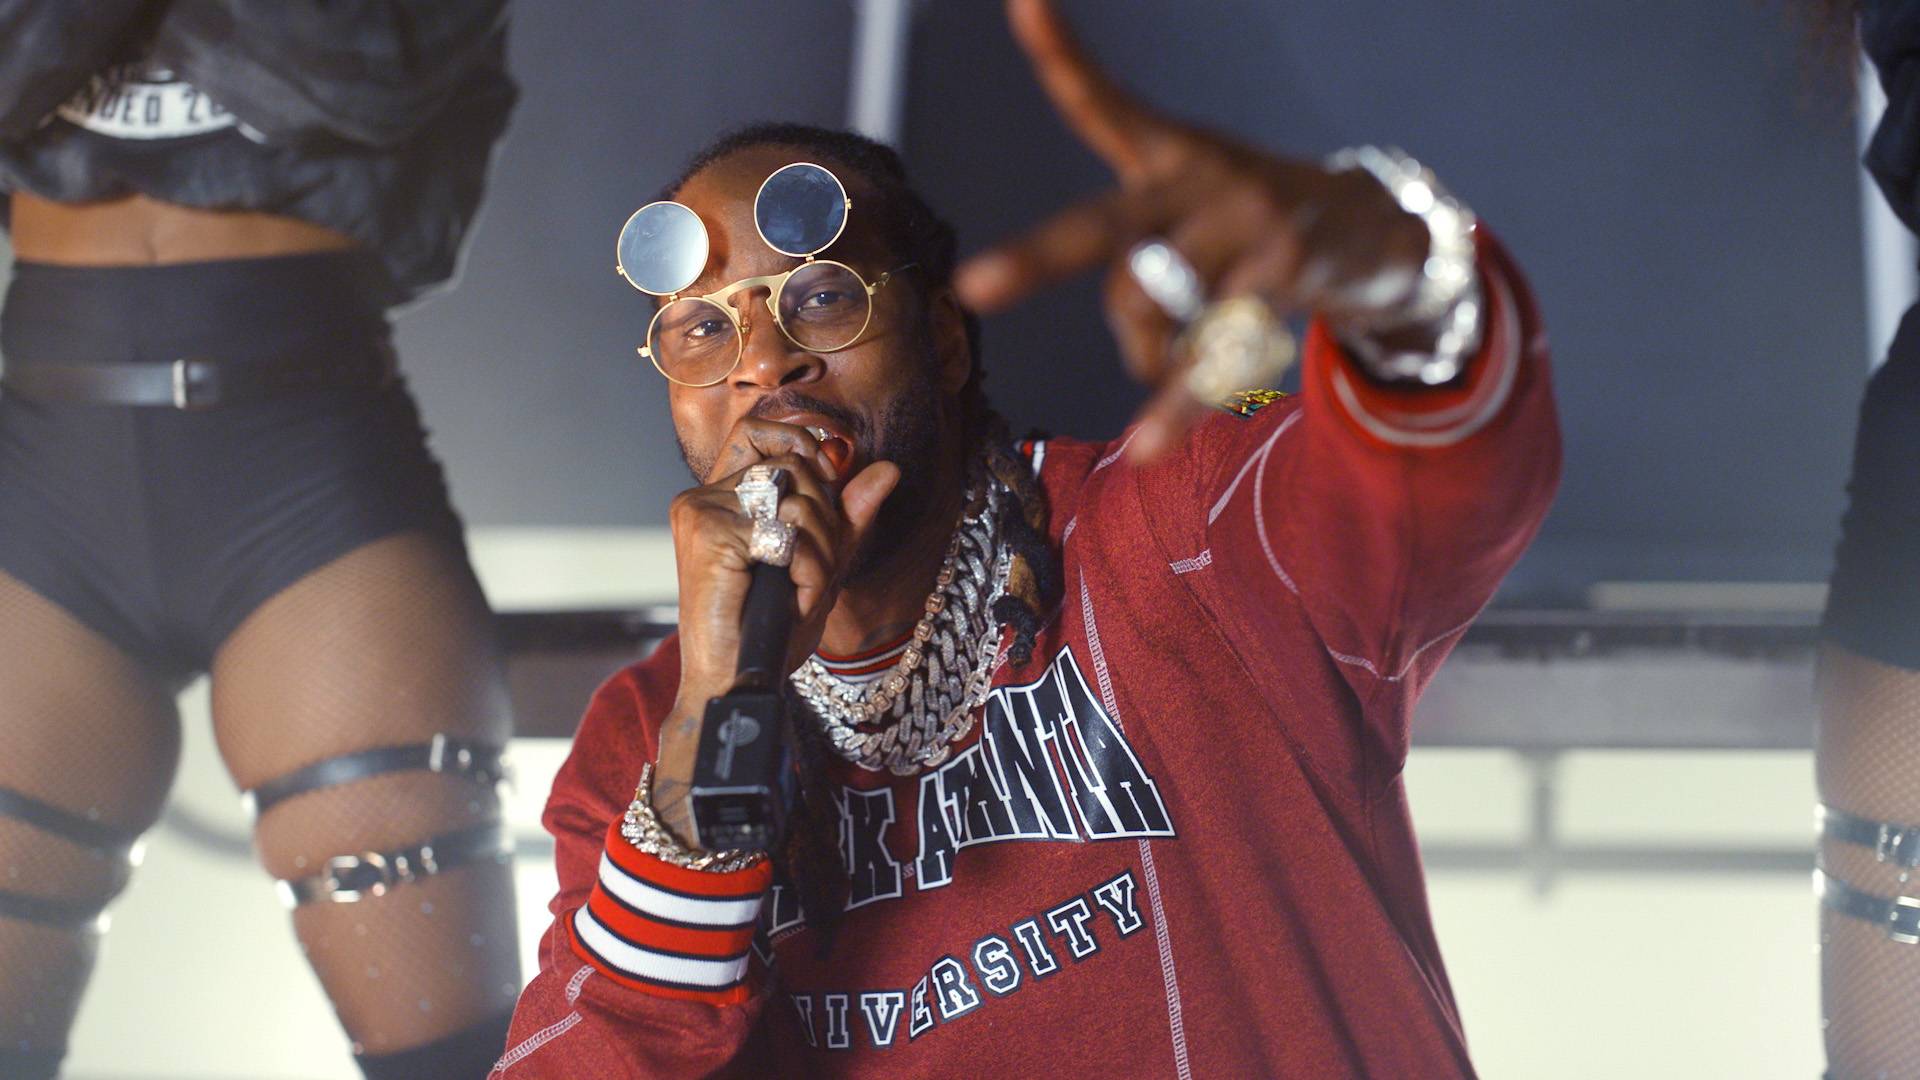 2 Chainz performing in a red shirt at the BET Hip Hop Awards 2020.